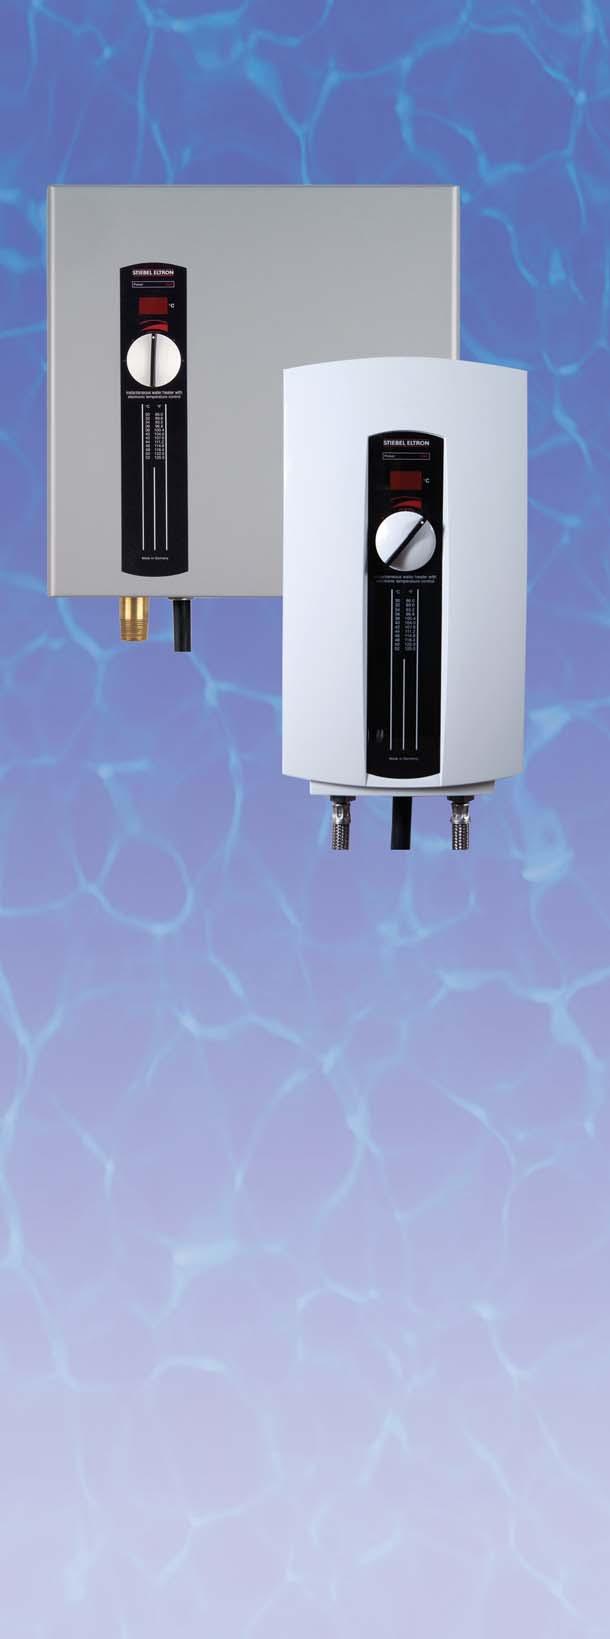 TEMPRA / DHC-E TANKLESS ELECTRIC WATER HEATERS Tempra / DHC-E Featuring Advanced Microprocessor Control Control